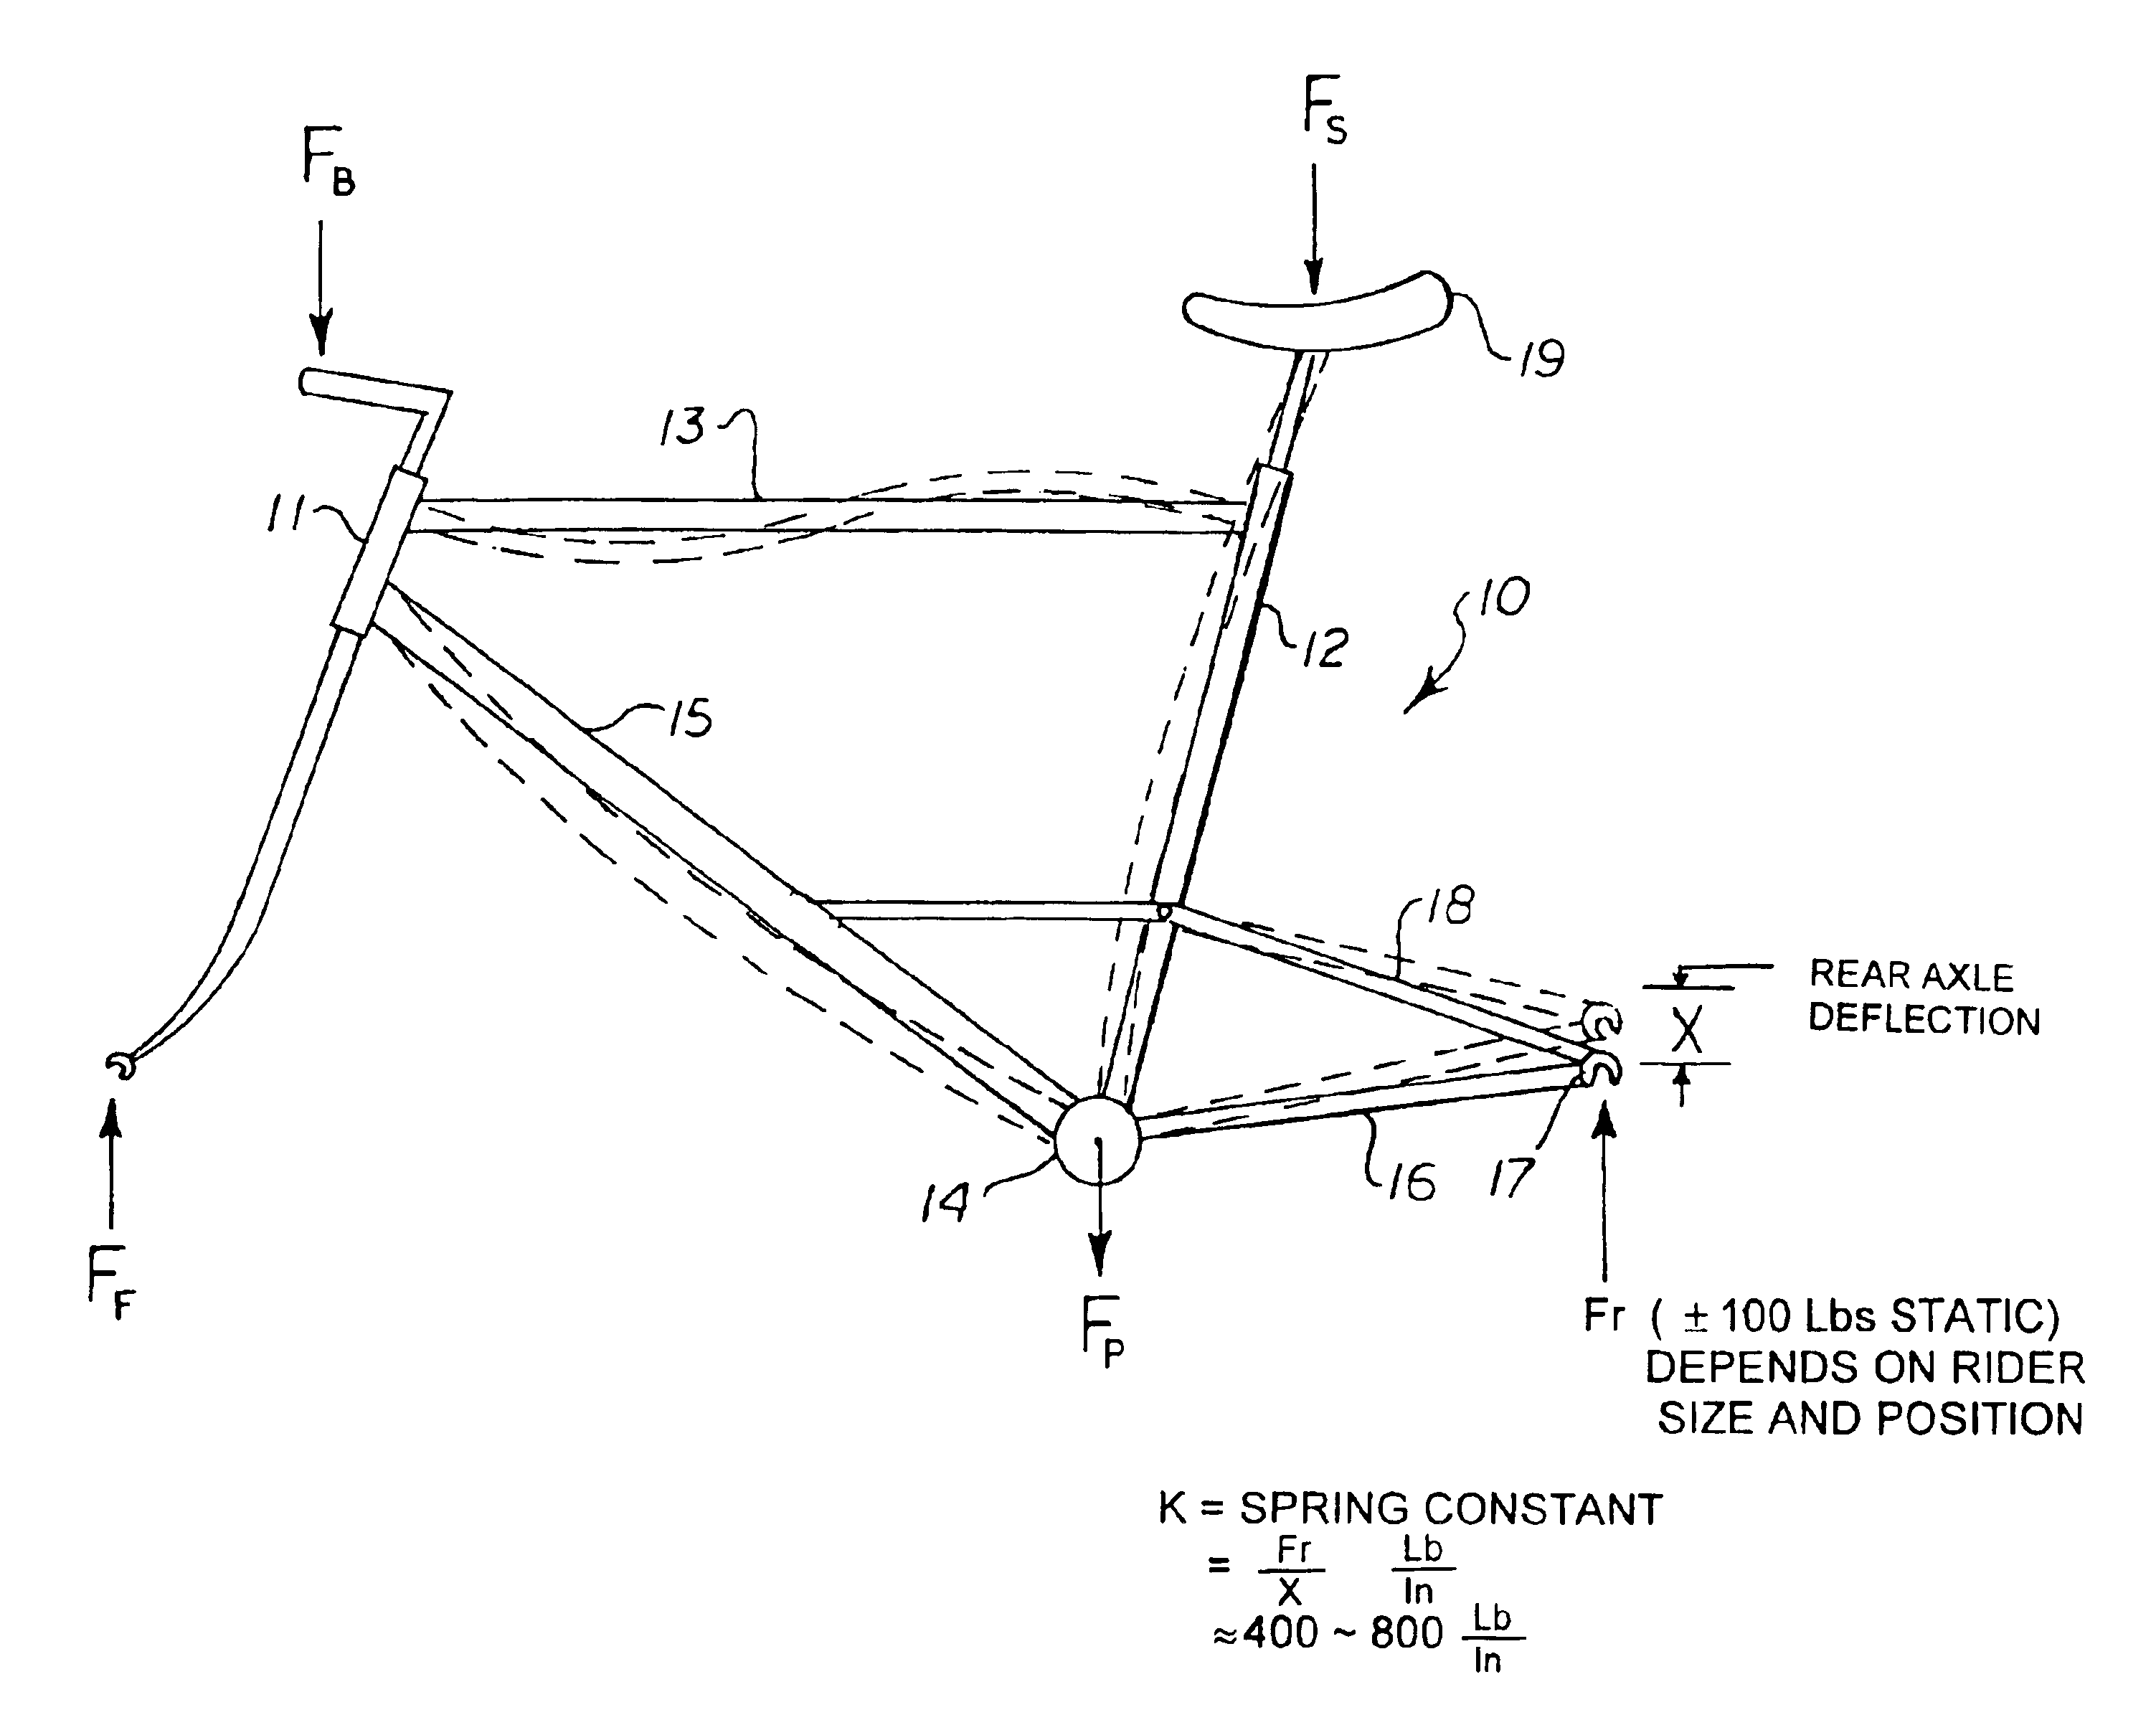 Bicycle frame with rear passive suspension